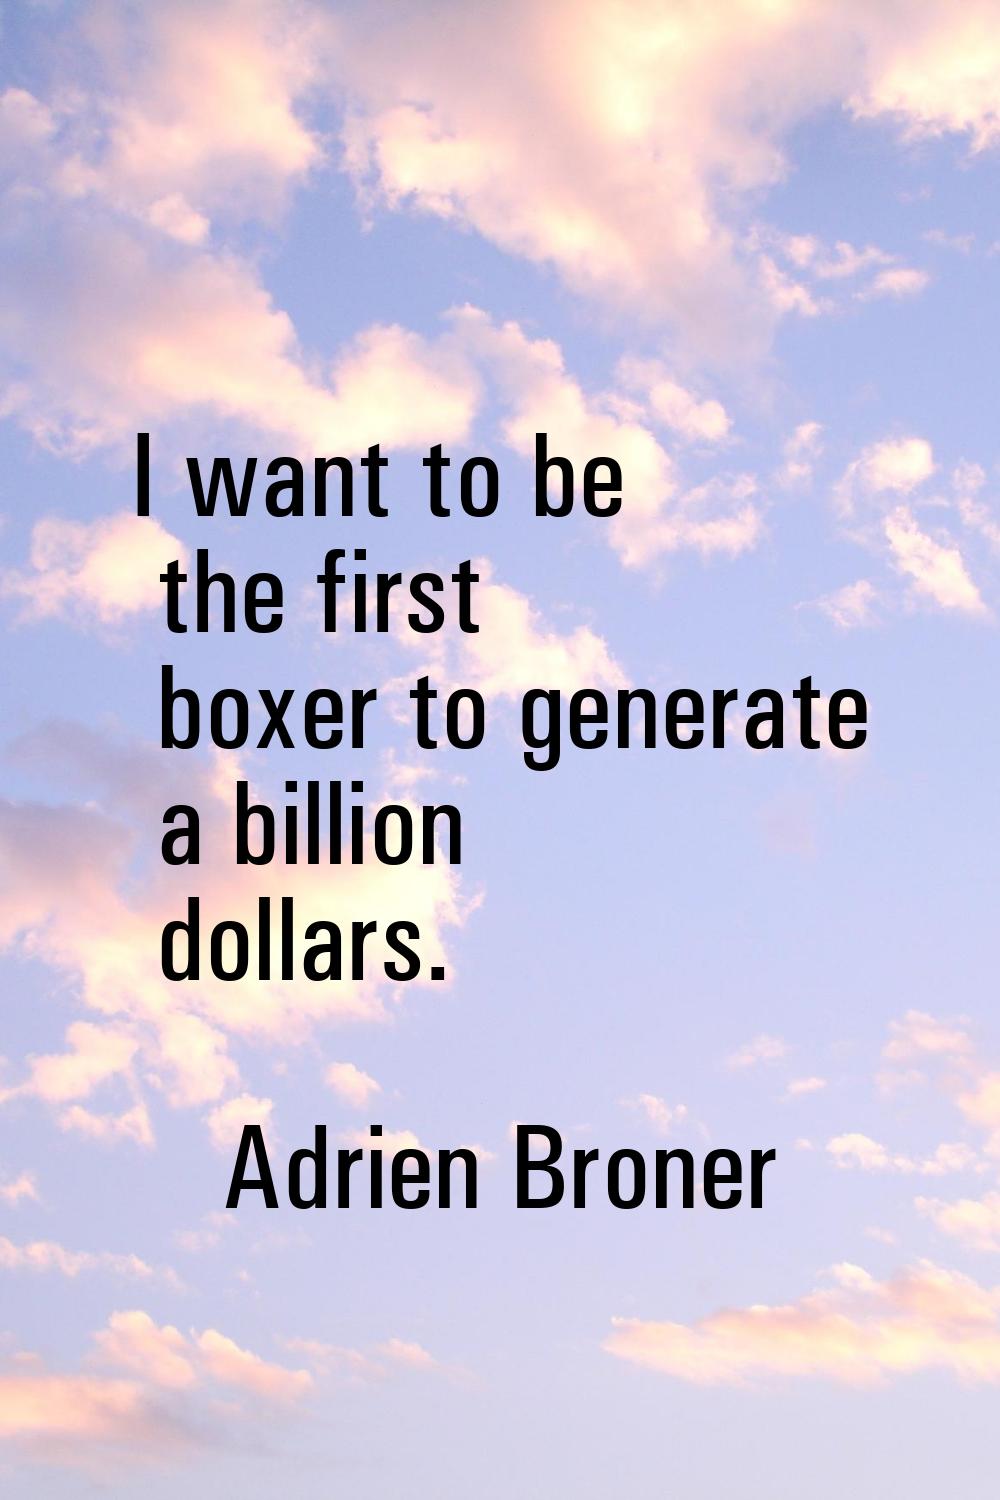 I want to be the first boxer to generate a billion dollars.